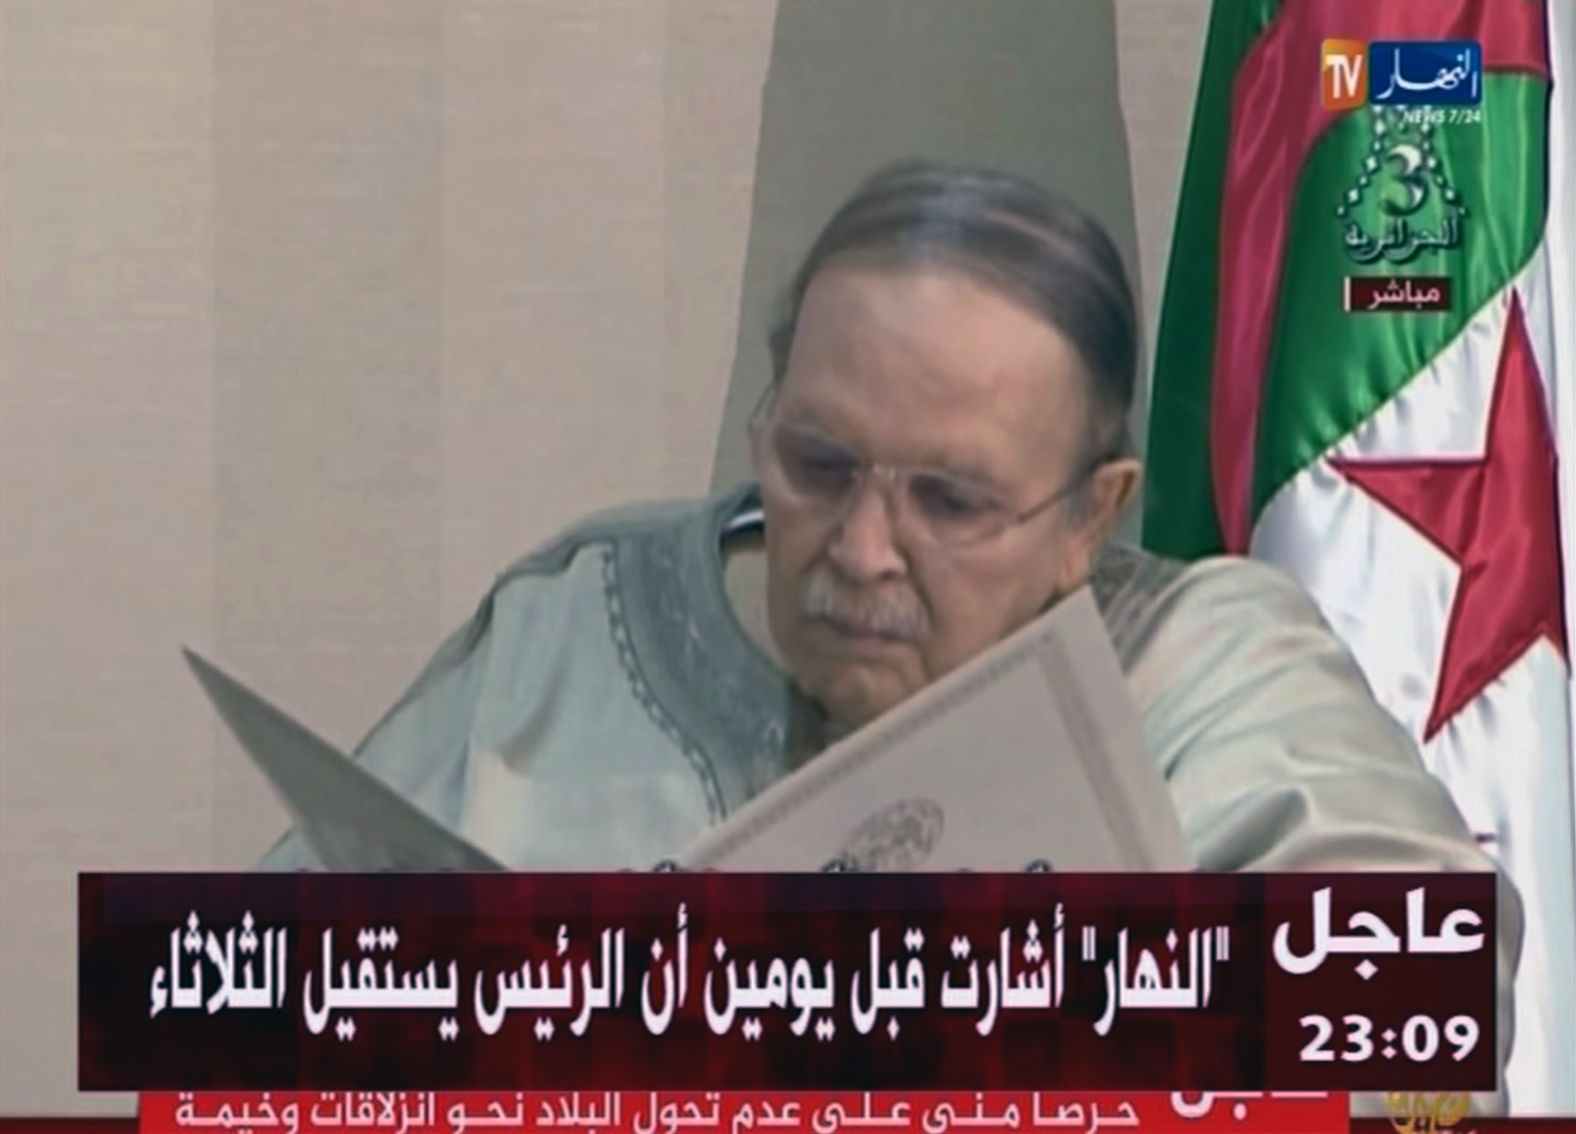 In this image from state TV broadcaster ENTV, Bouteflika reviews a document as he presents his resignation in April 2019. His resignation comes after 20 years in office and six weeks of nationwide protests aimed at pushing him and his inner circle from power.